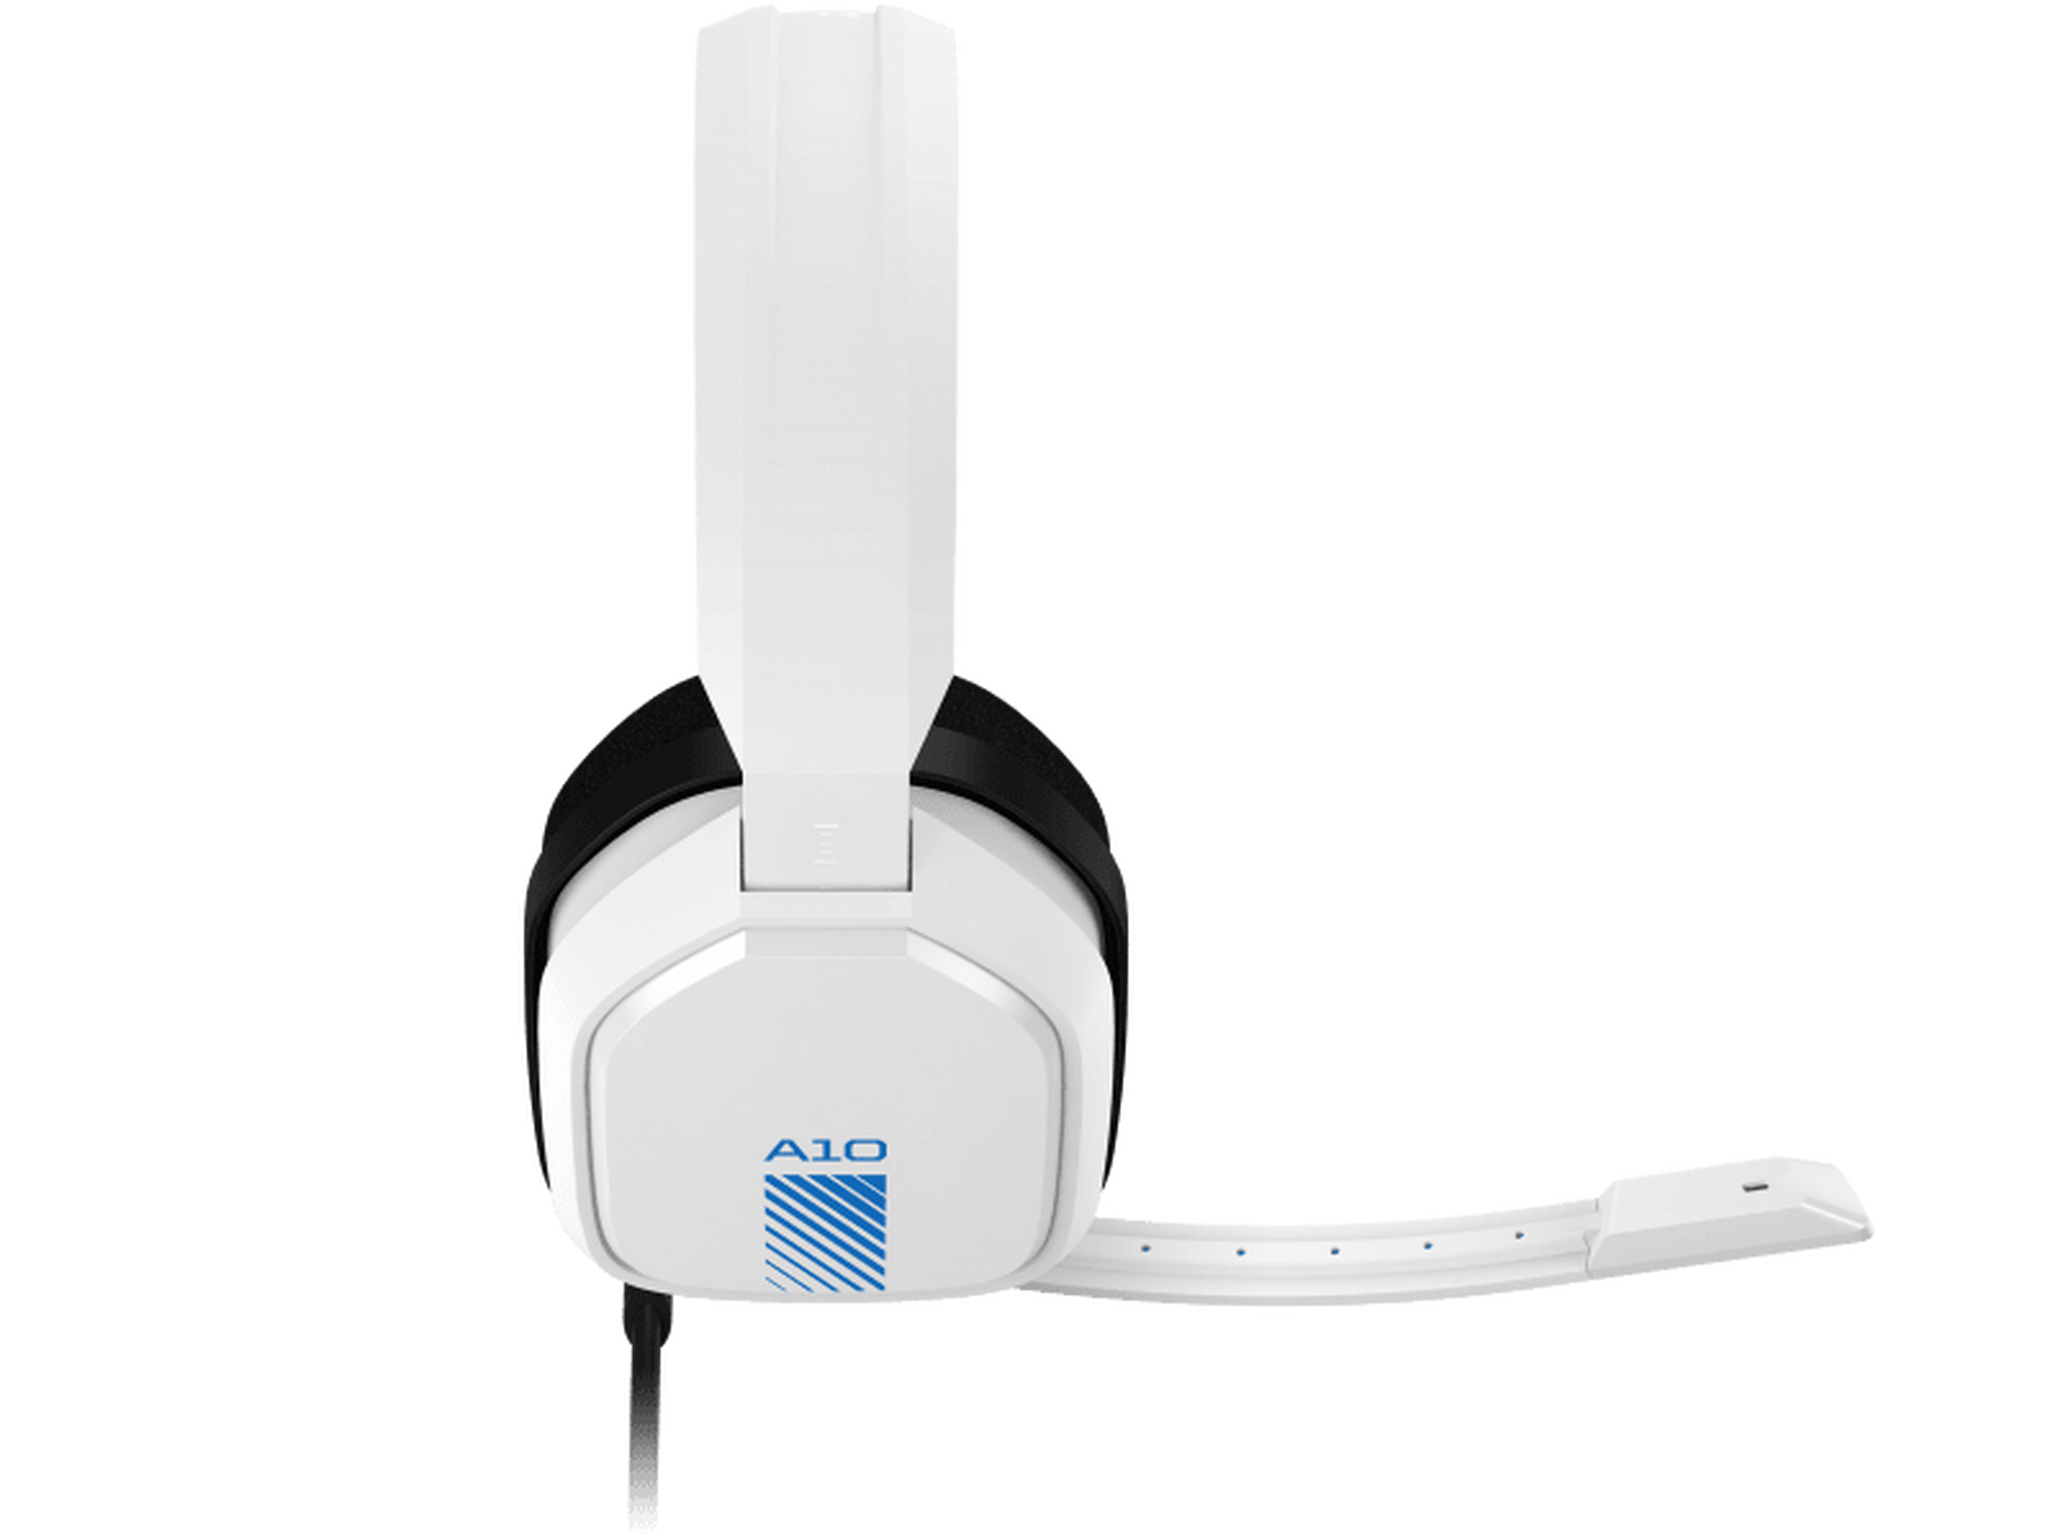 Astro A10 PS4 Wired Gaming Headset - White